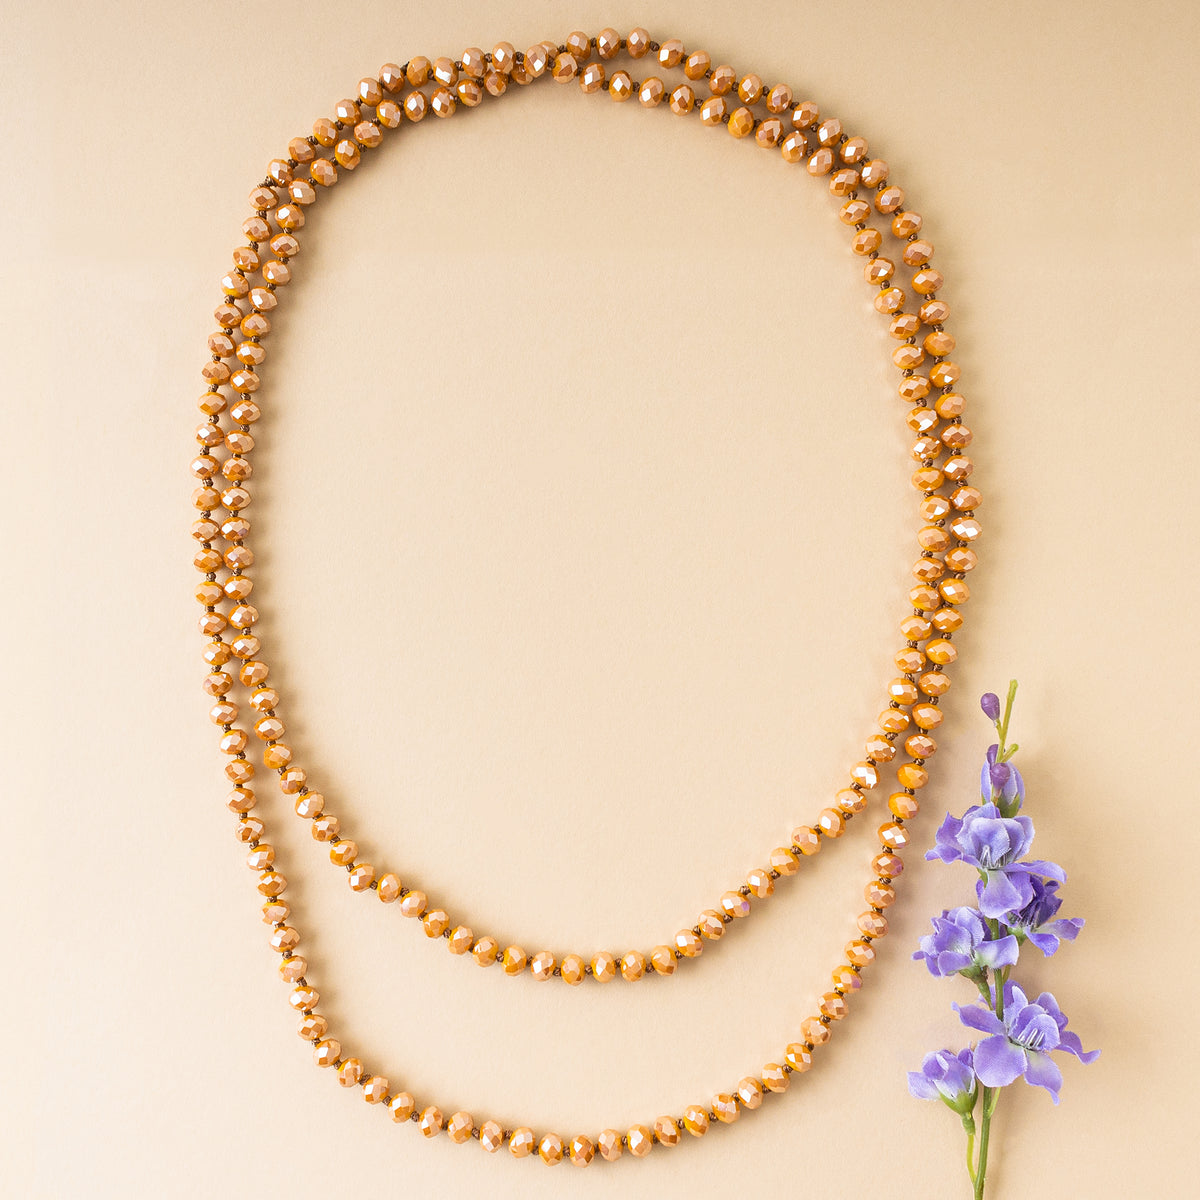 72028-22 - Crystal Beaded Necklace - Gold - Fashion Jewelry Wholesale